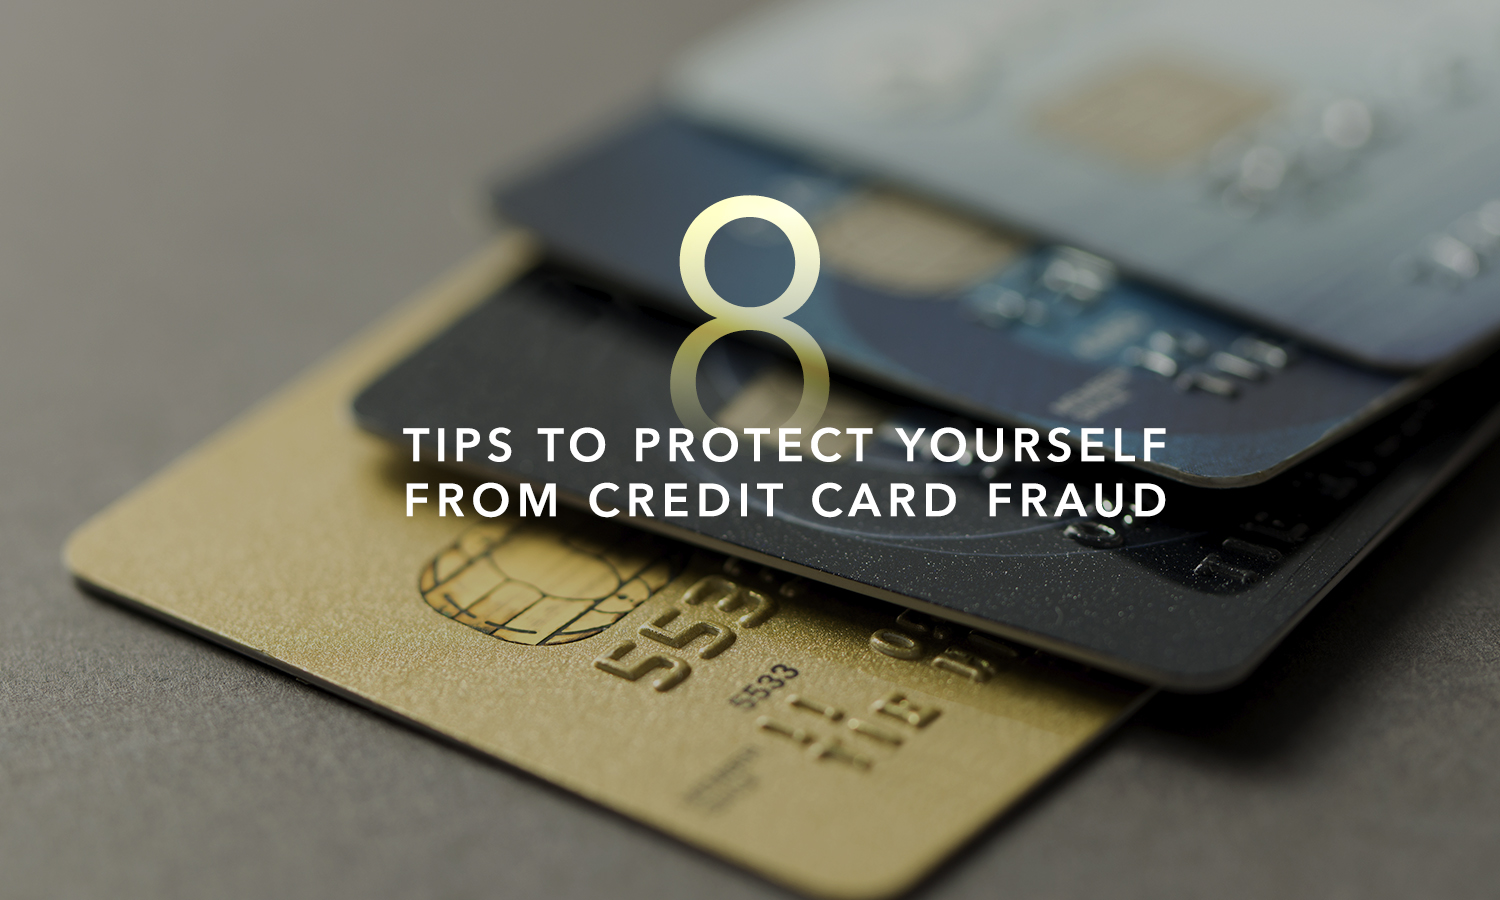 8 tips to protect yourself from credit card fraud